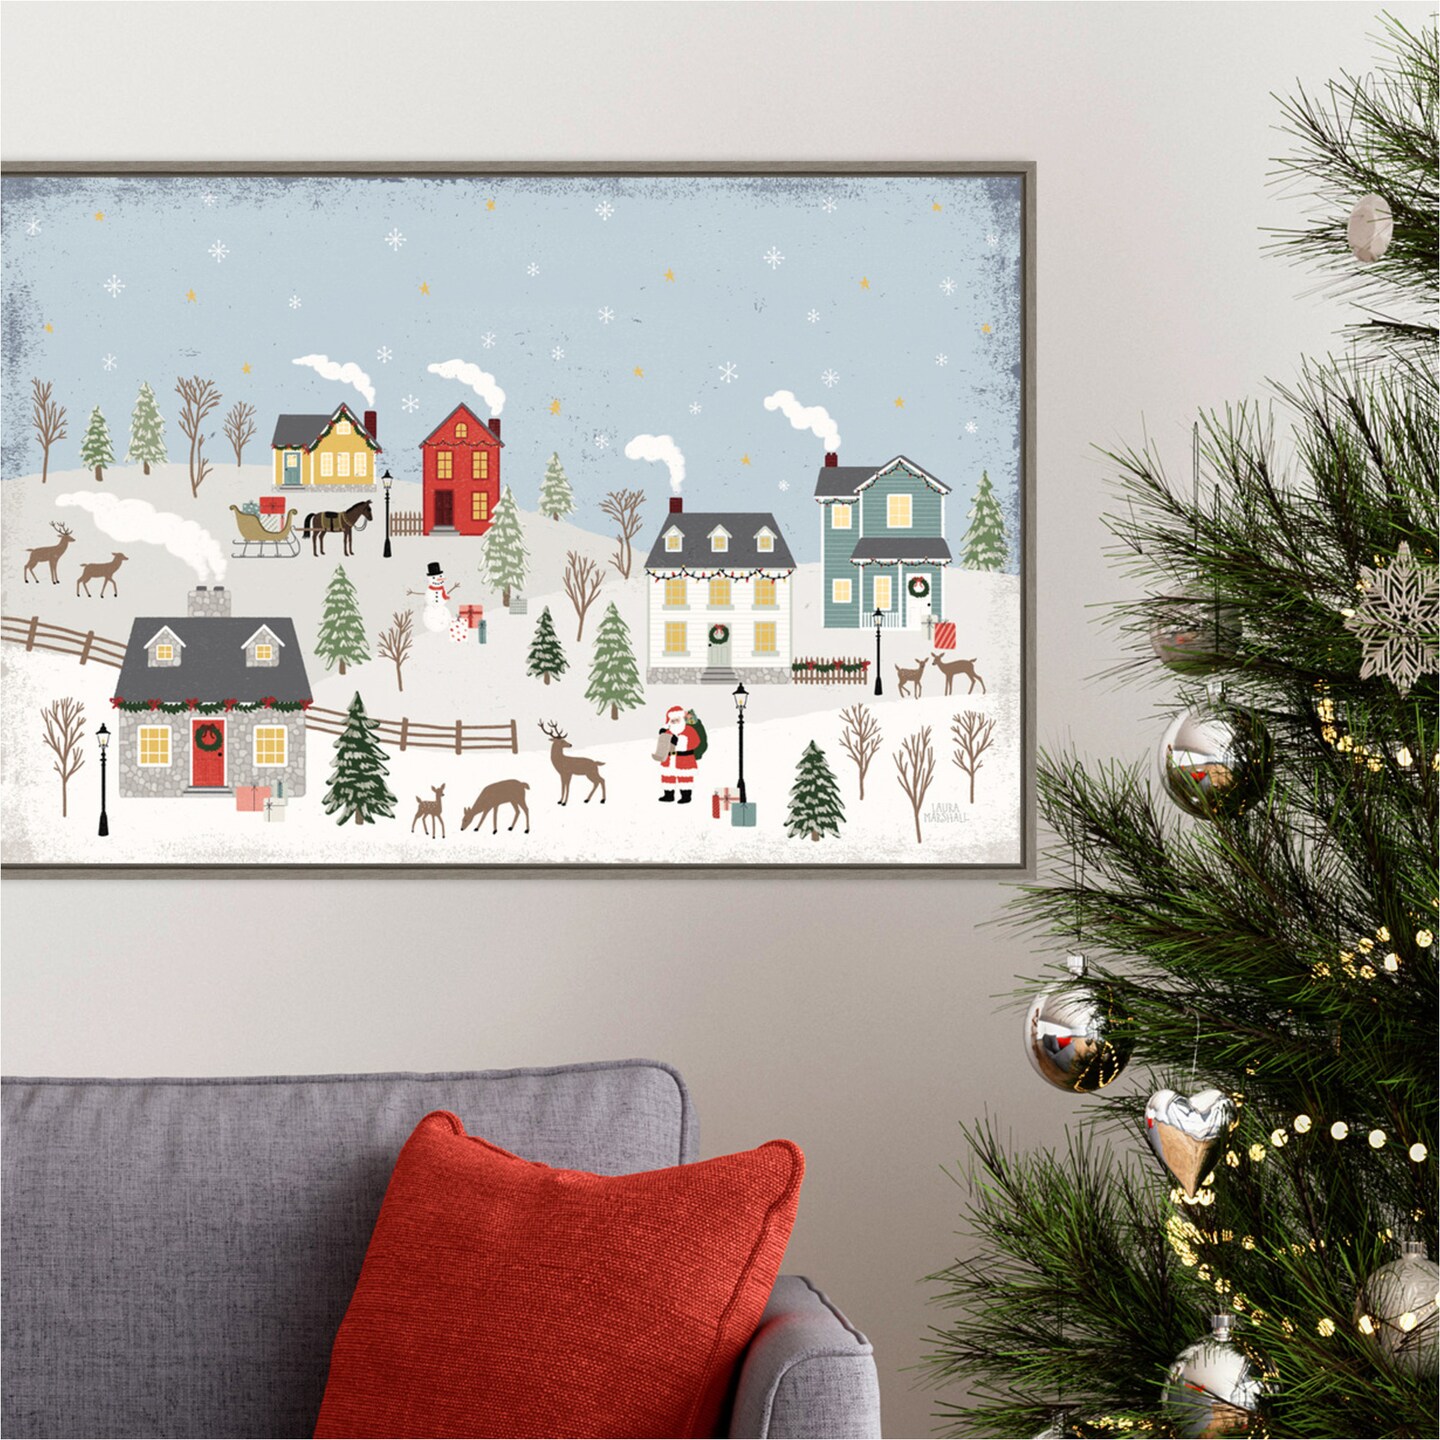 Christmas Village II Day by Laura Marshall 33-in. W x 23-in. H. Canvas Wall Art Print Framed in Grey